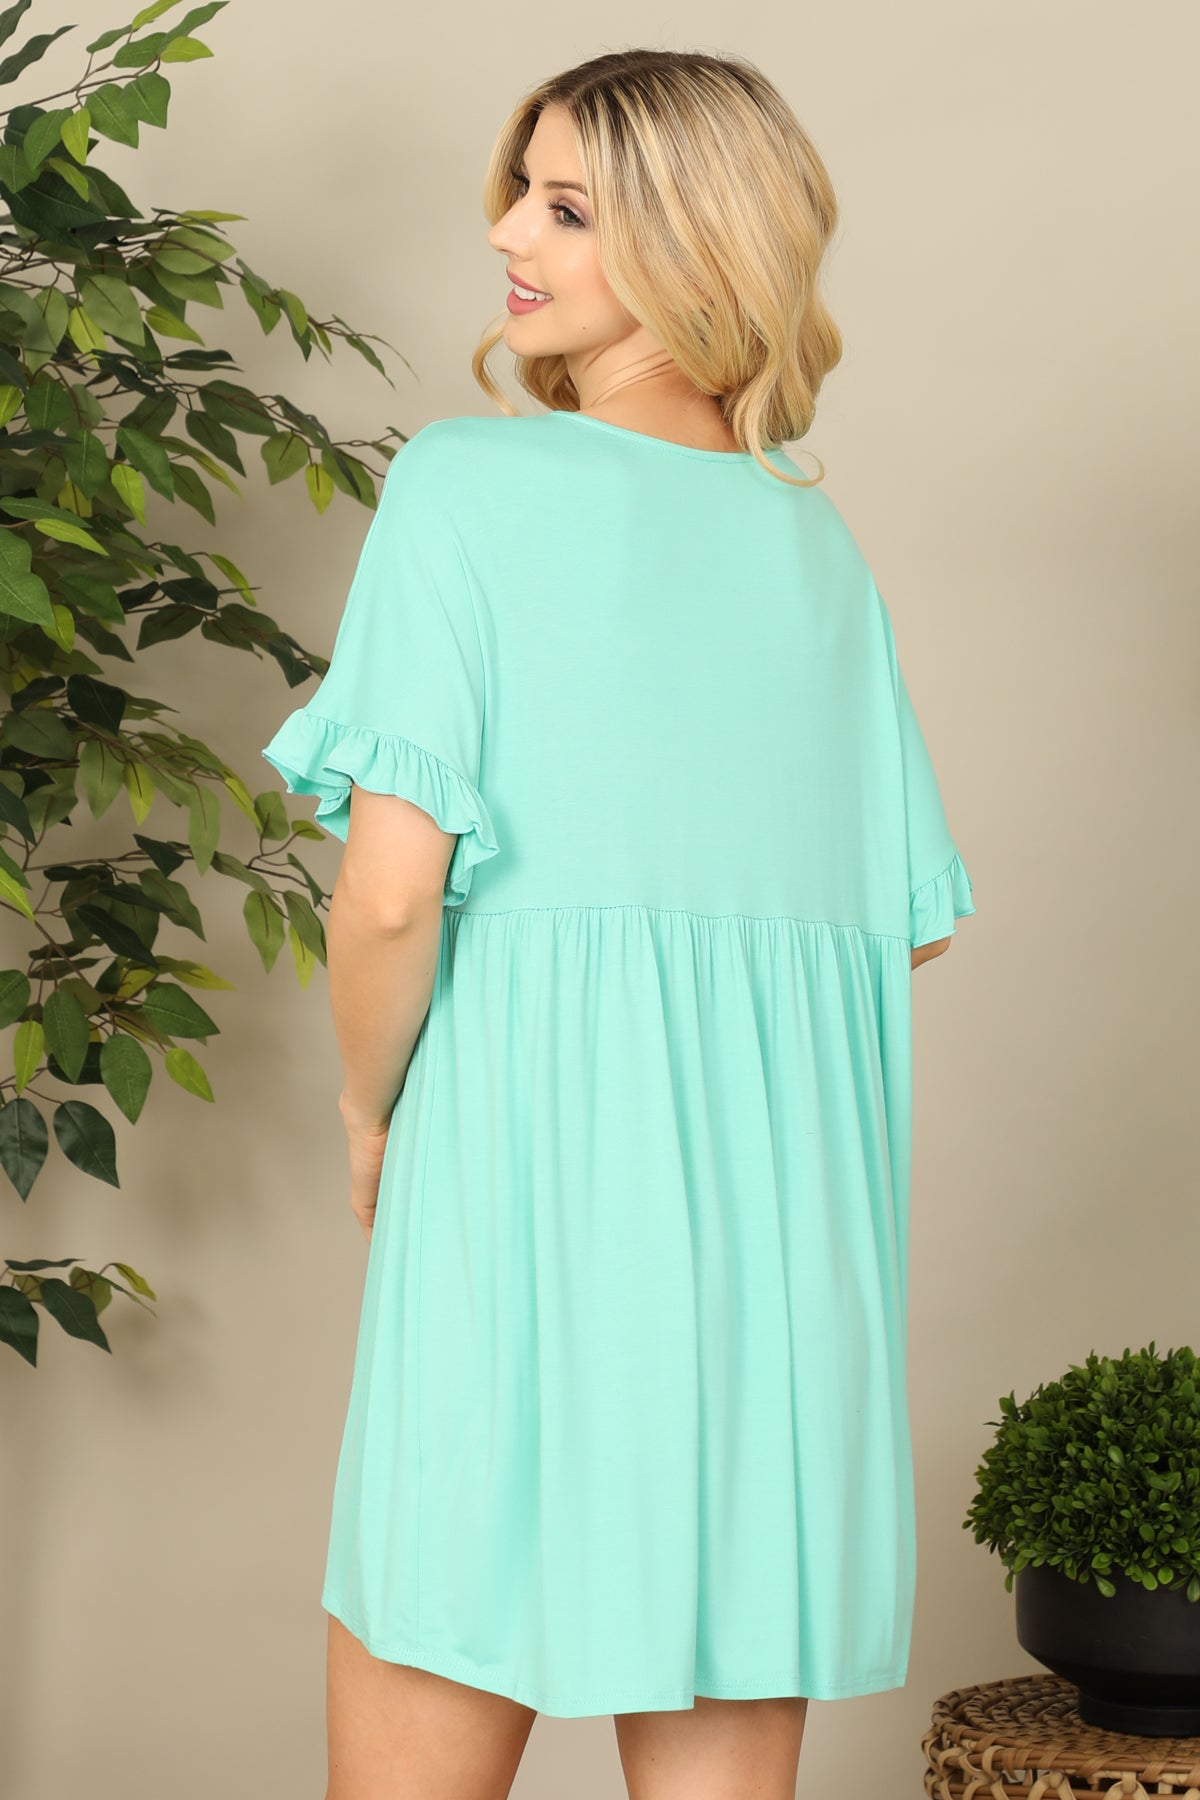 V-NECK RUFFLE SLEEVE SOLID DRESS 2-2-2-2 (NOW $5.75 ONLY!)